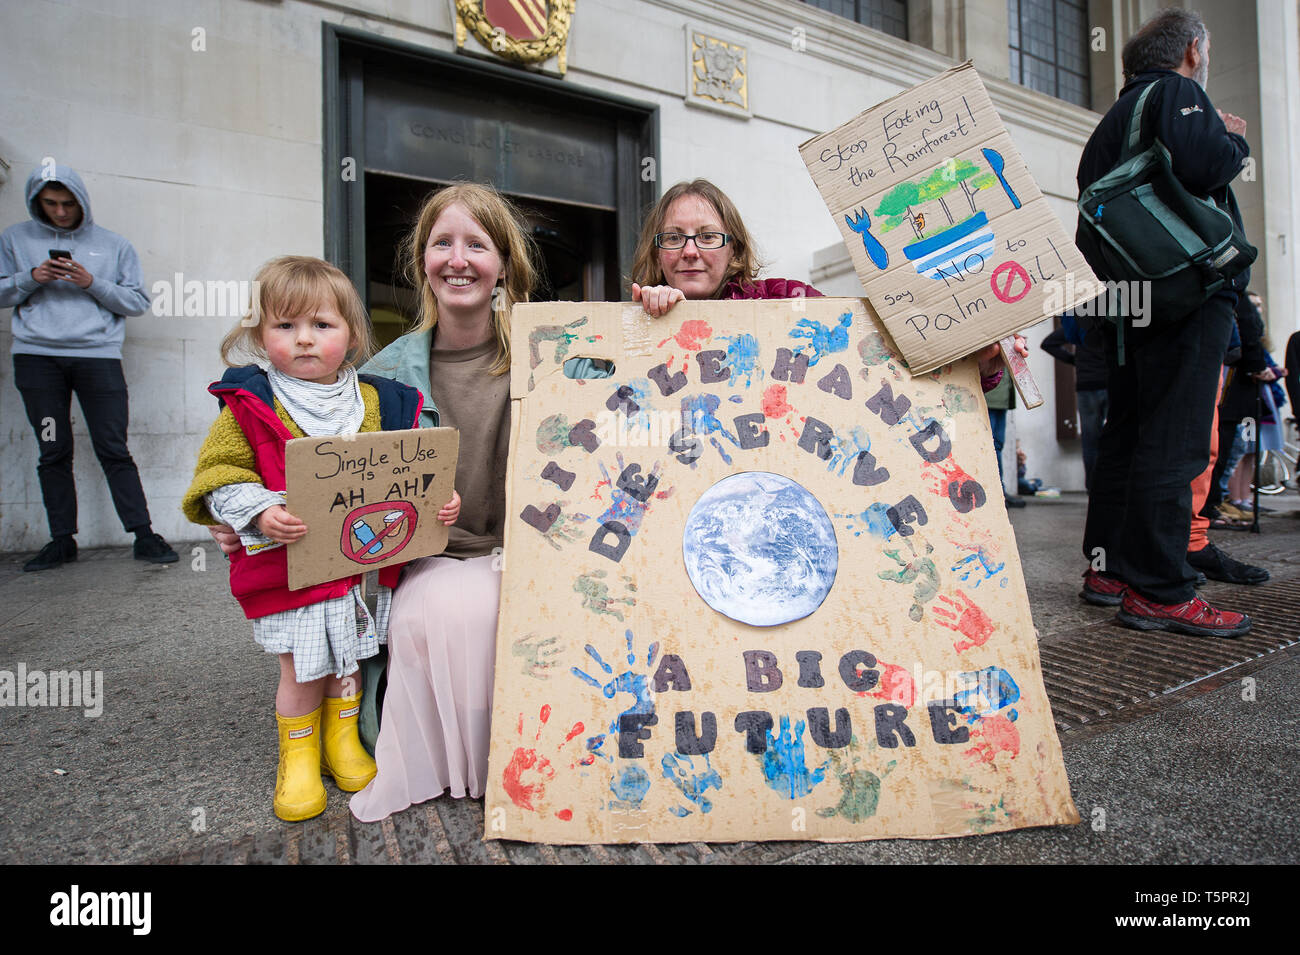 Manchester, UK. 26th Apr, 2019. A mother and daughter and friend seen with placards during the weekly Extinction Rebellion protest outside Manchester Central Library. Extinction Rebellion is a socio-political movement which uses nonviolent resistance to protest against climate breakdown, biodiversity loss, and the risk of human extinction and ecological collapse. Credit: Steven Speed/SOPA Images/ZUMA Wire/Alamy Live News Stock Photo